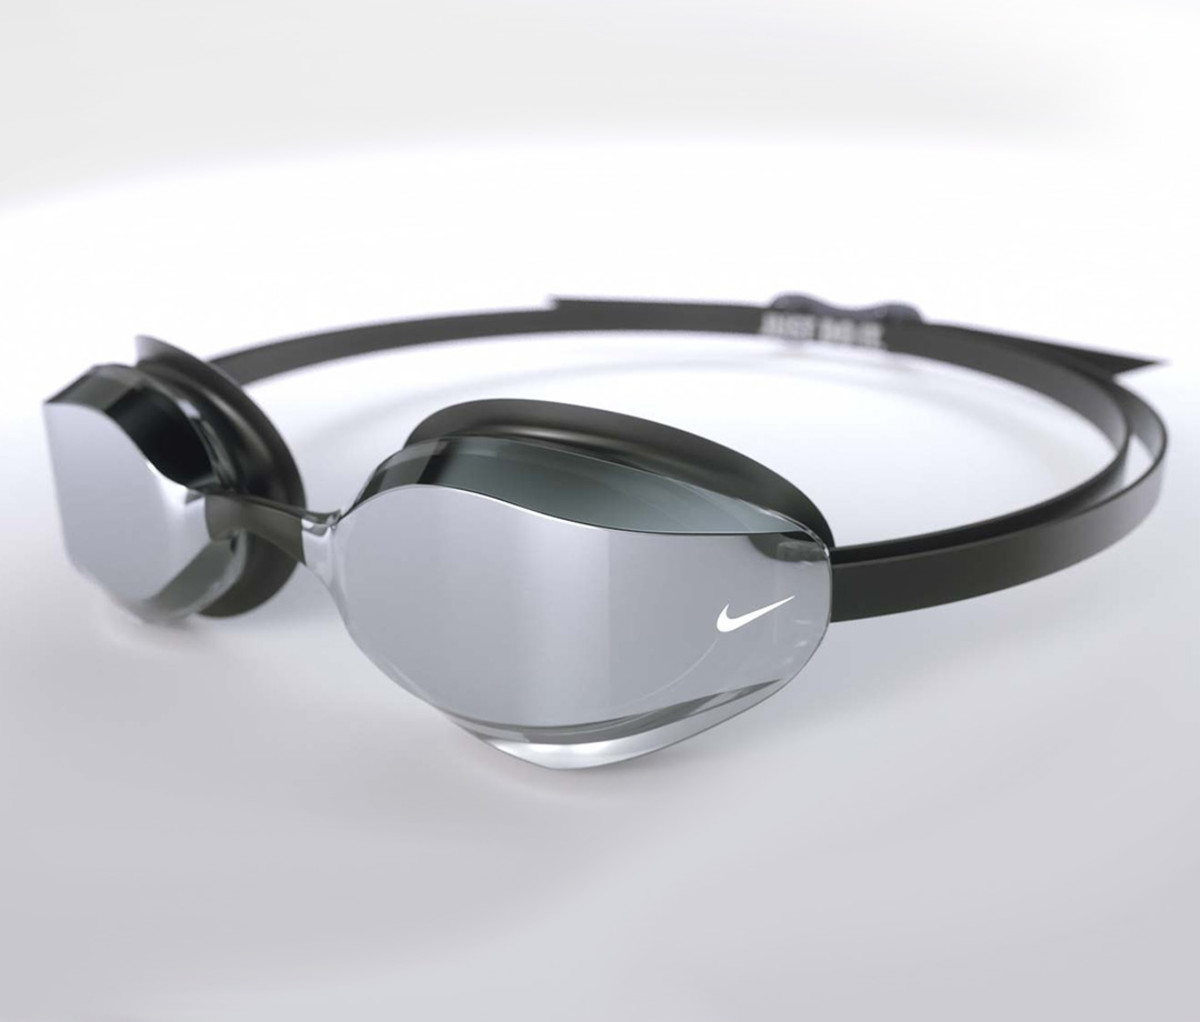 The Vapor goggle from Nike